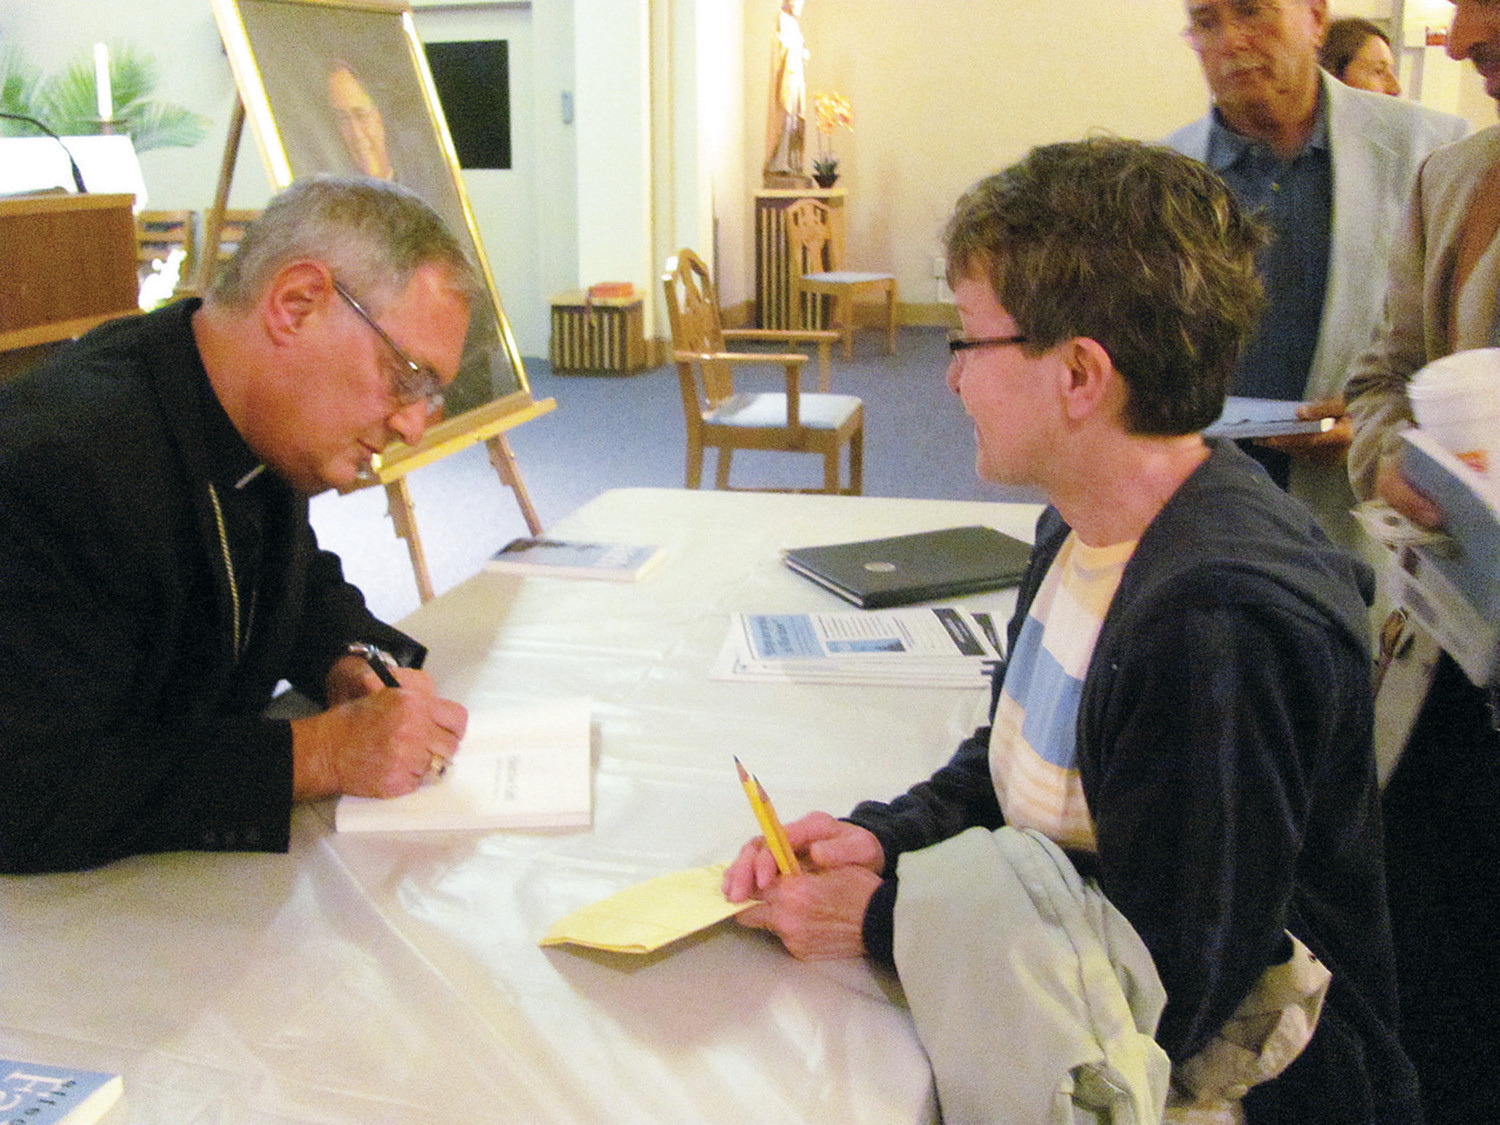 In 2010, Bishop Tobin visited St. Eugene Church in Chepachet to discuss his book titled “Effective Faith: Faith That Can Make a Difference.” The book includes a series of essays that focus on faith in everyday life, including the life of the church, as well as through the bishop’s own spiritual journey.